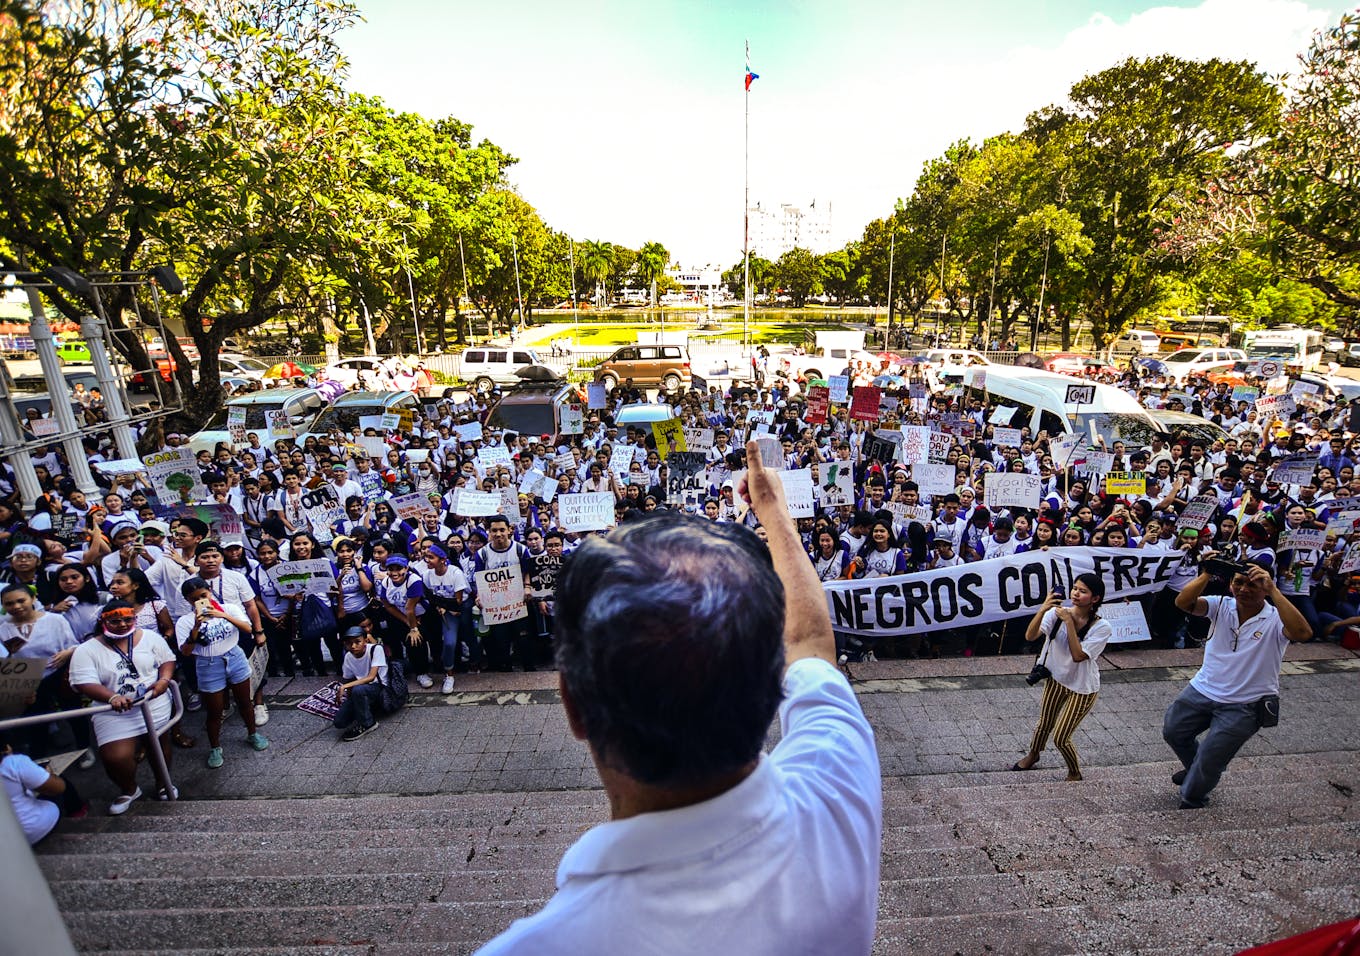 Negros Occidental governor gives thumbs up to Coal Free Negros protestors.